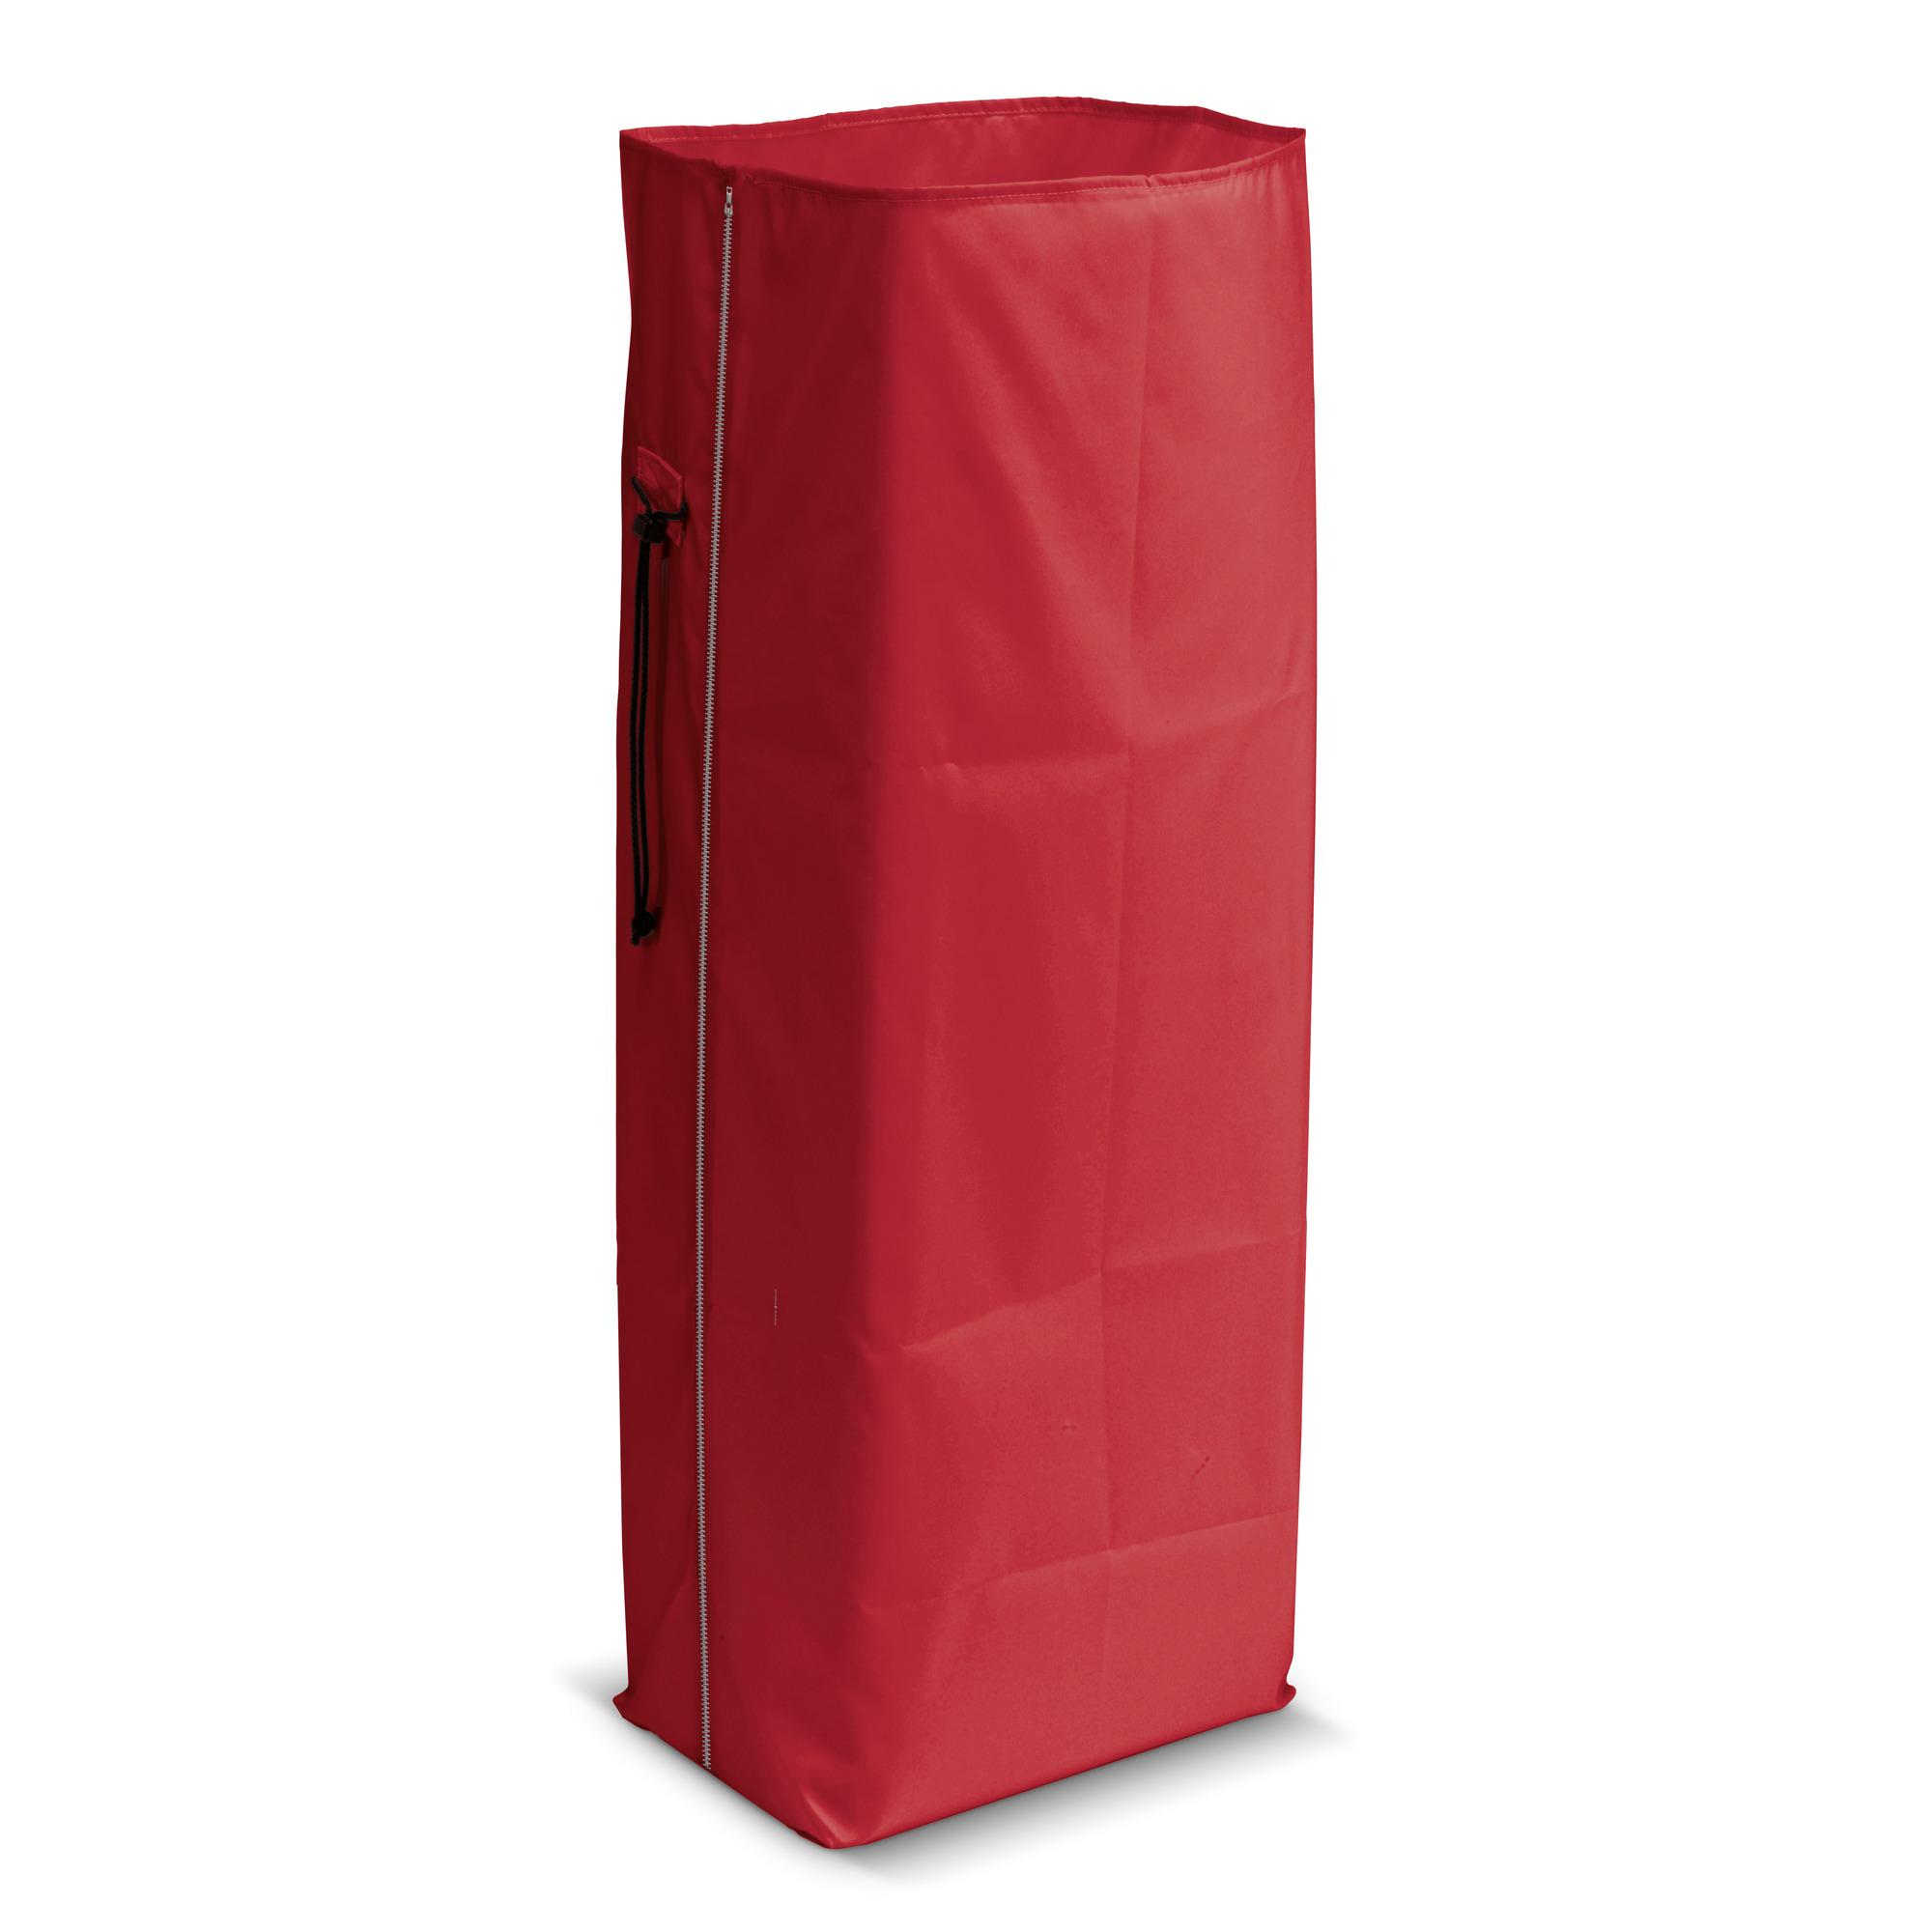 Kaercher Refuse sack with zip, 70 l, red